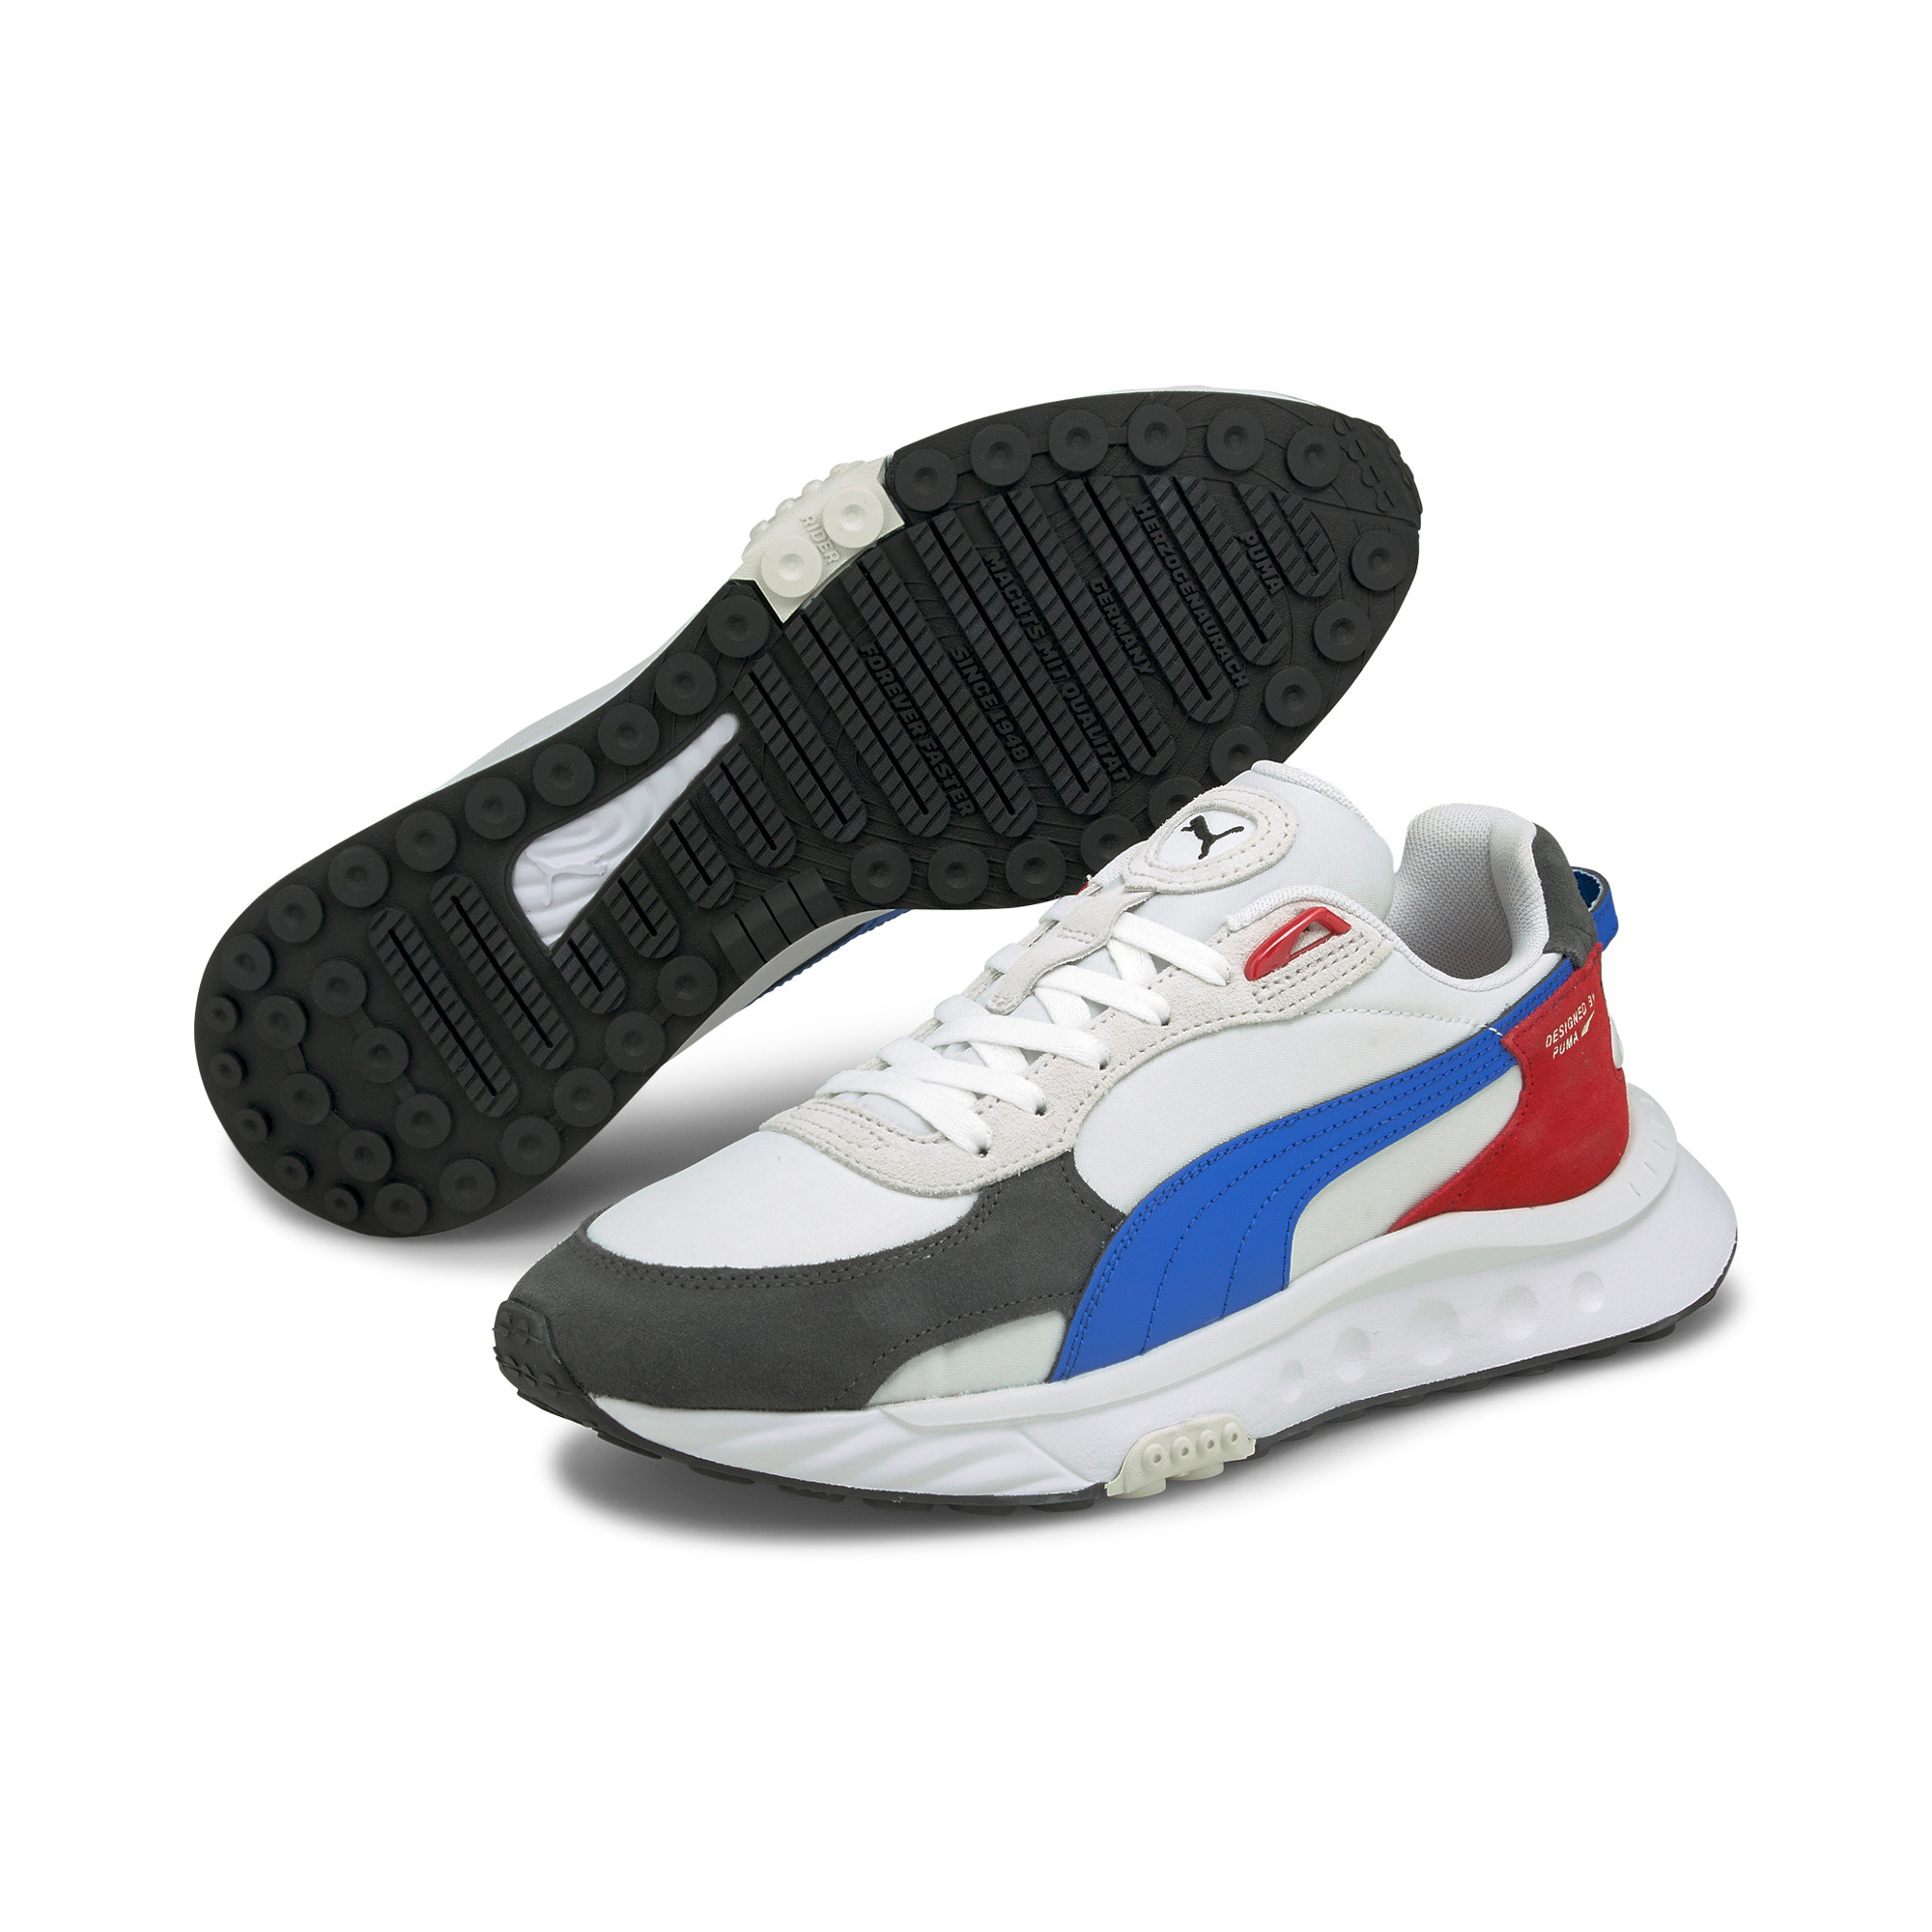 Sneakers PUMA, Bianco, large image number 2